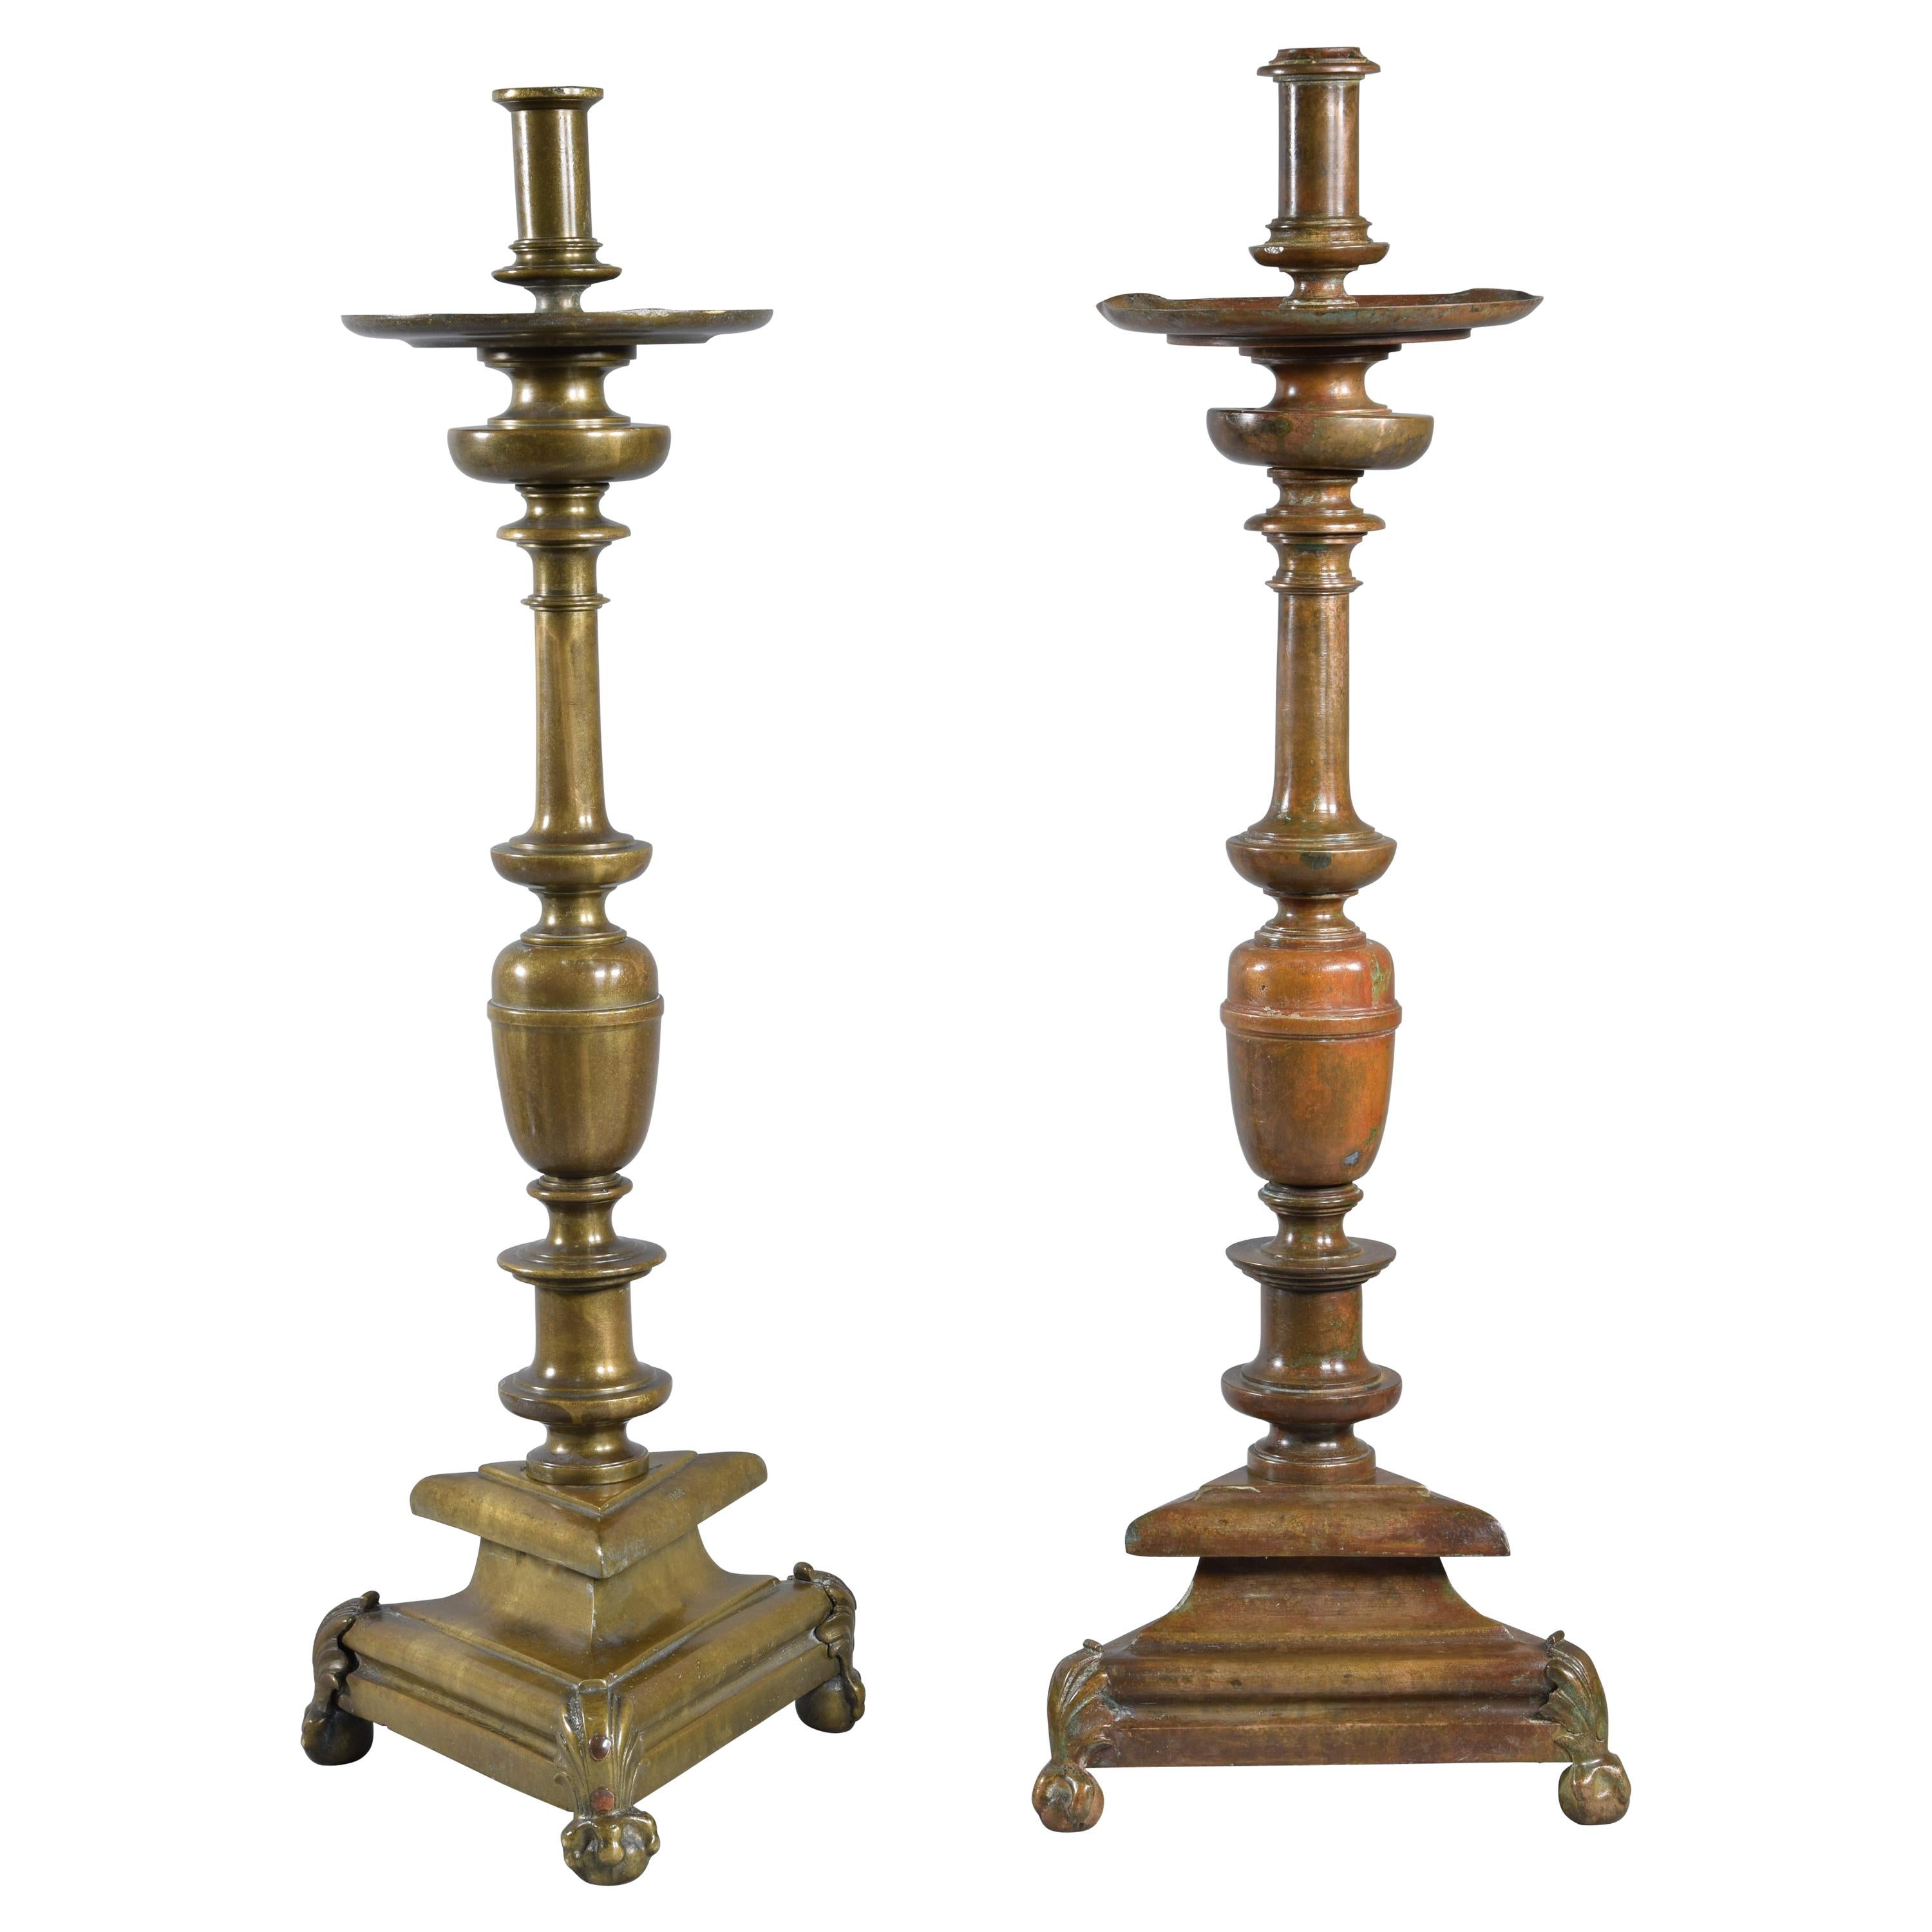 Bronze Candle Holders Pair, 20th Century, after Antique Models